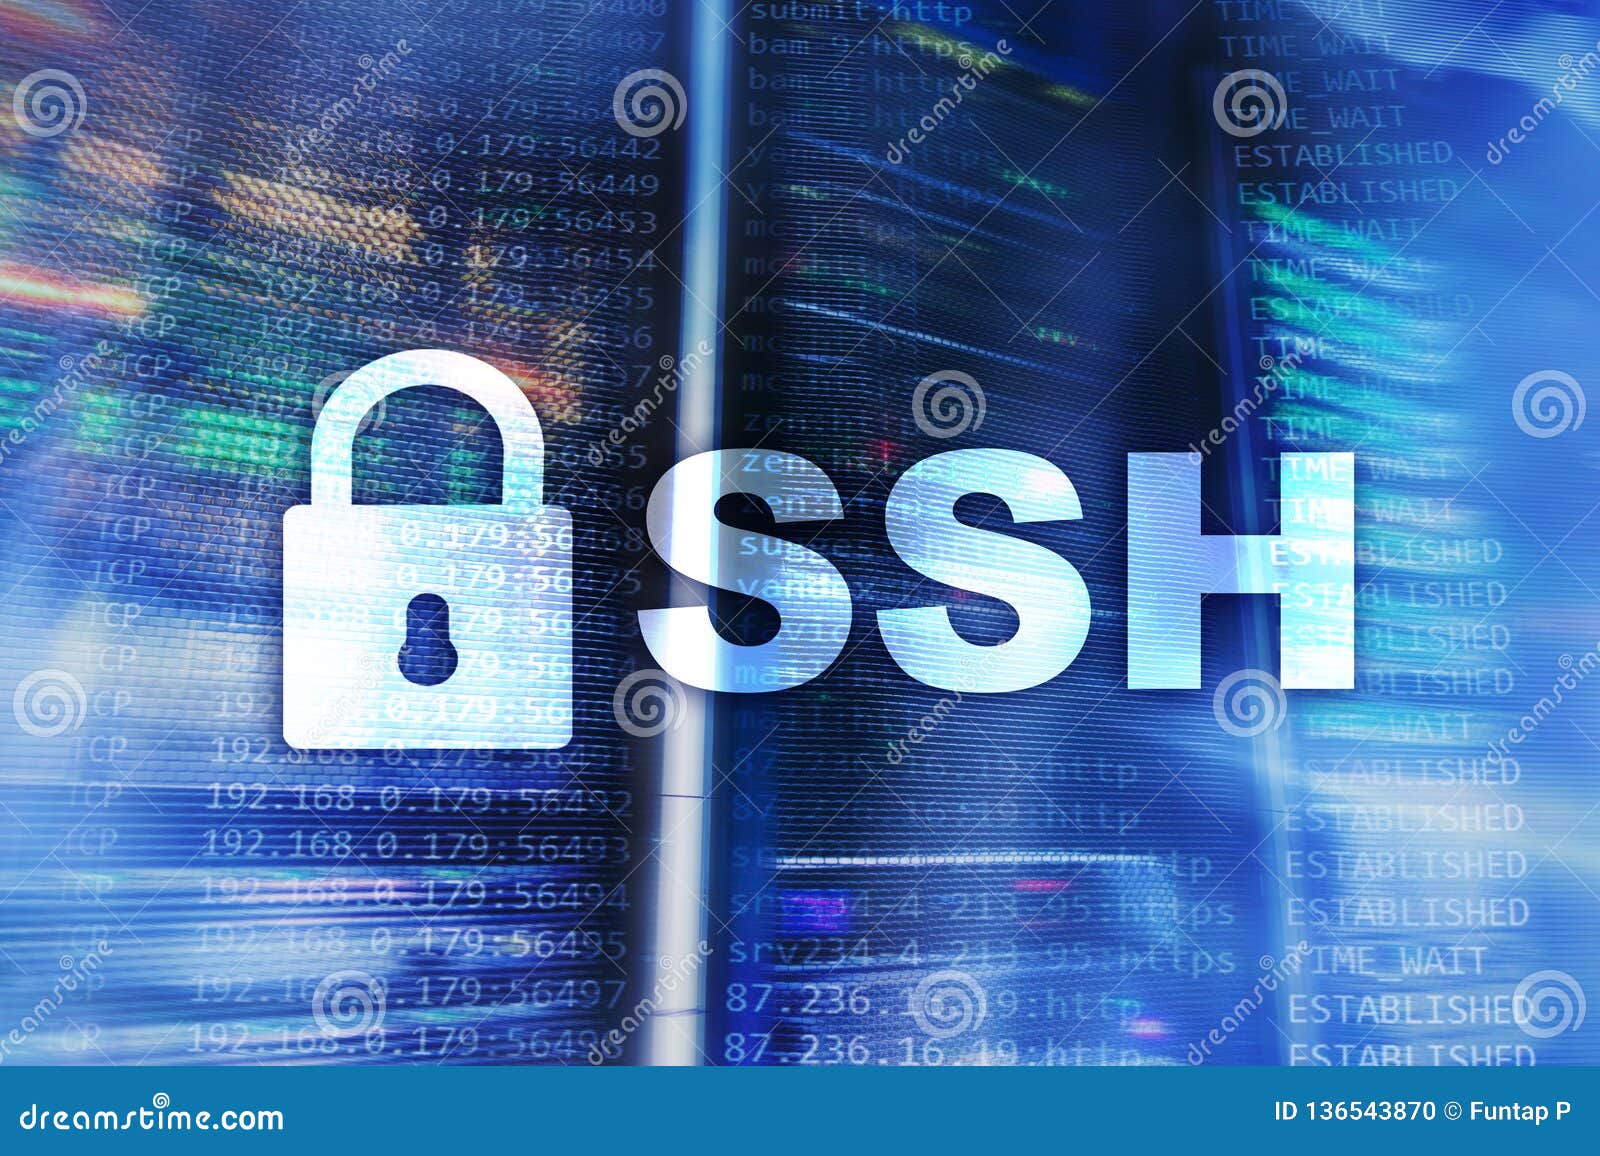 ssh shell secure